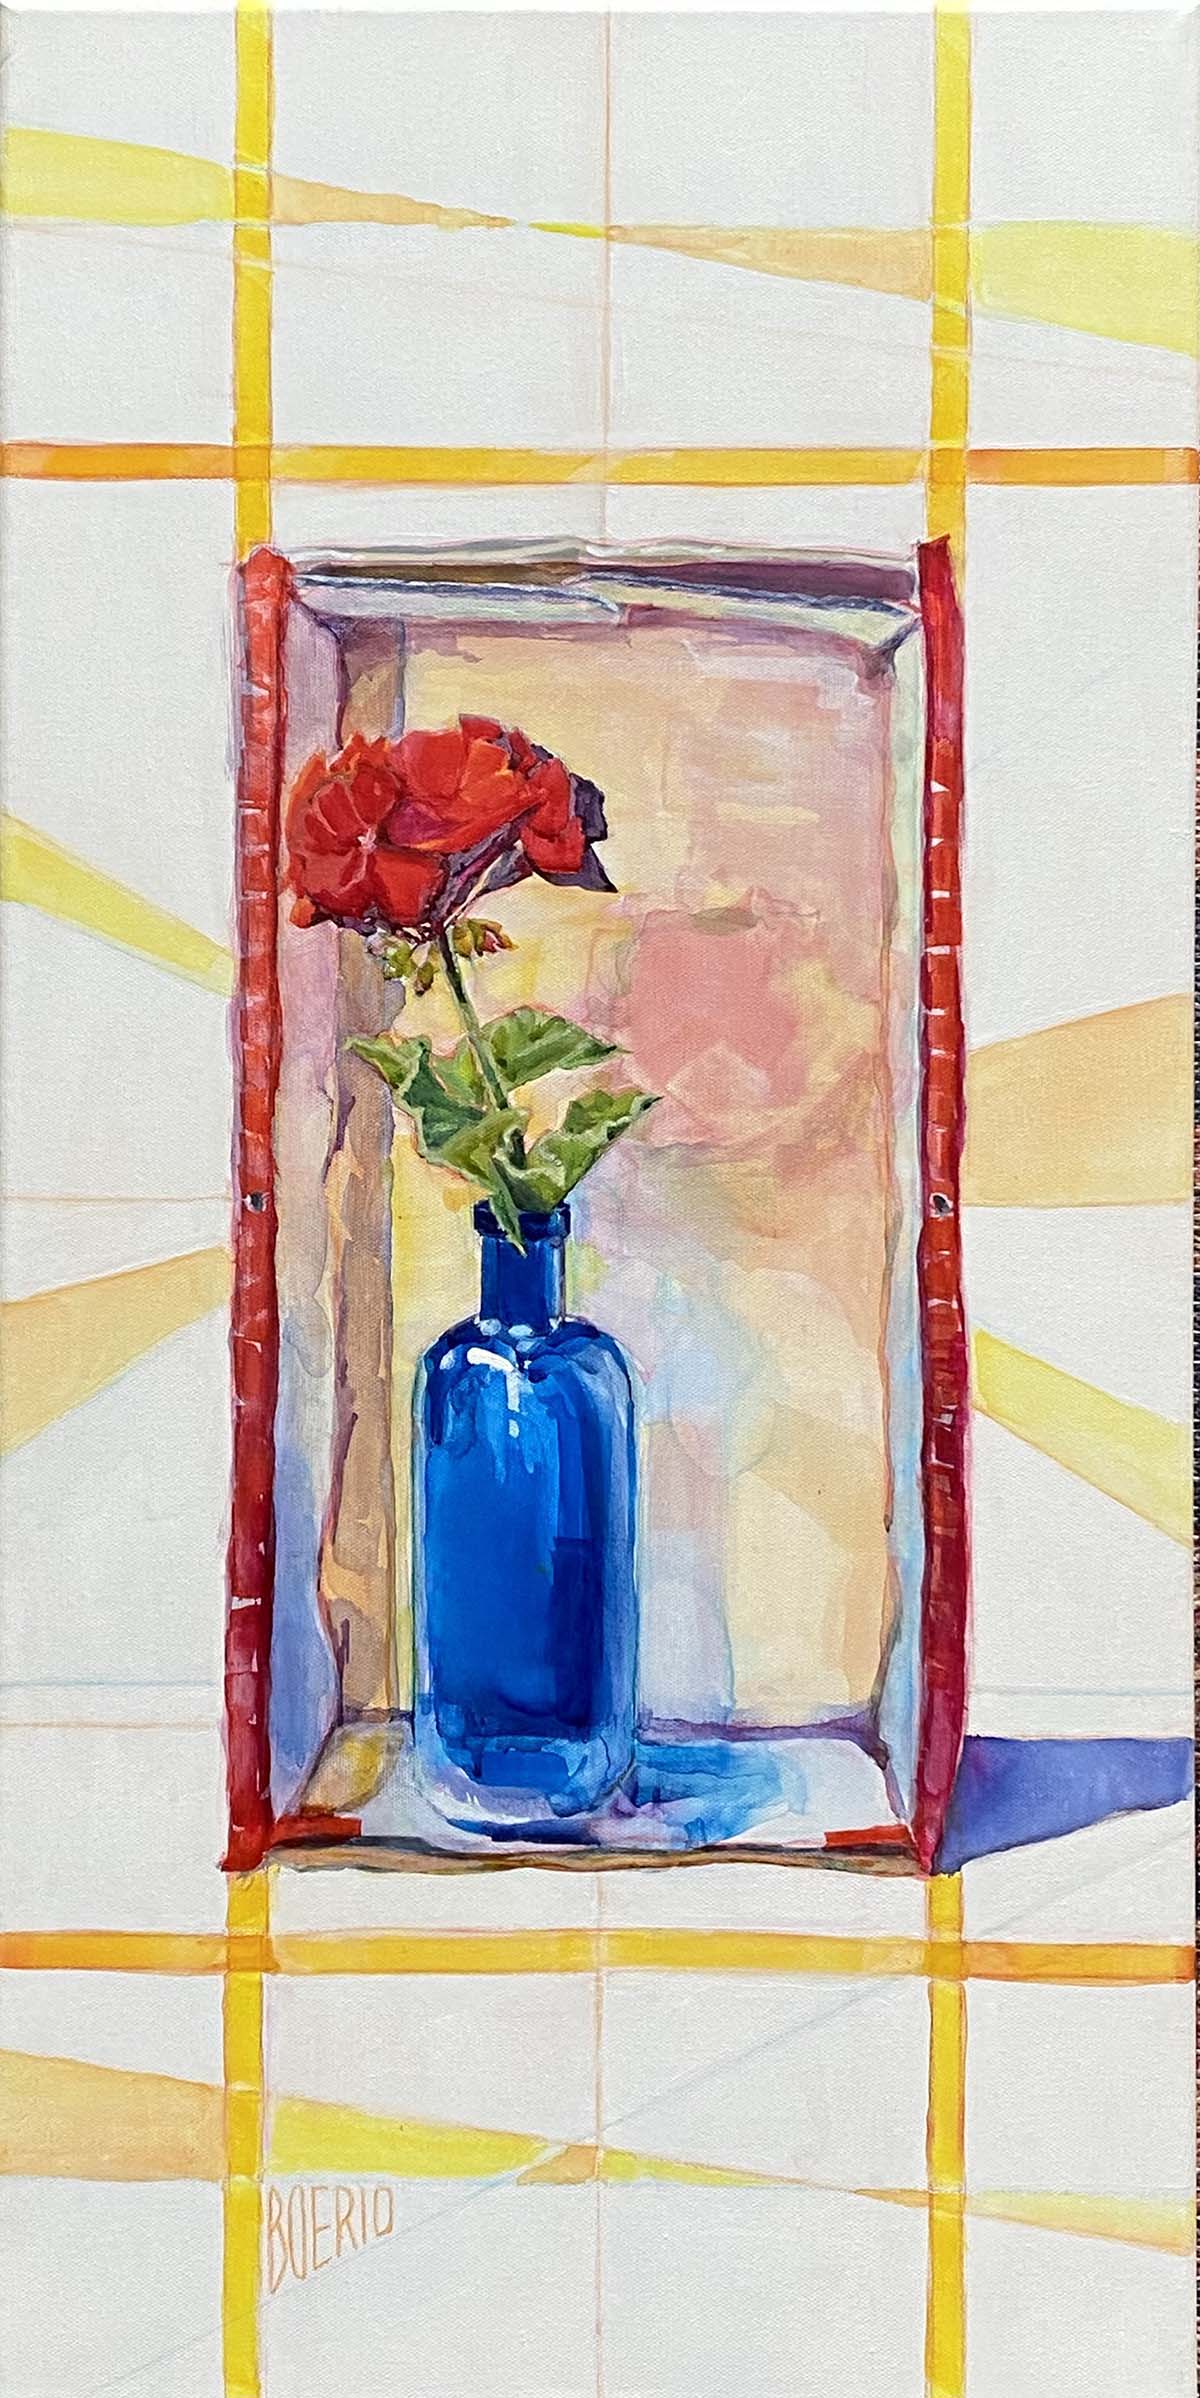 acrylic painting of a rose in a vase, with geometrical background